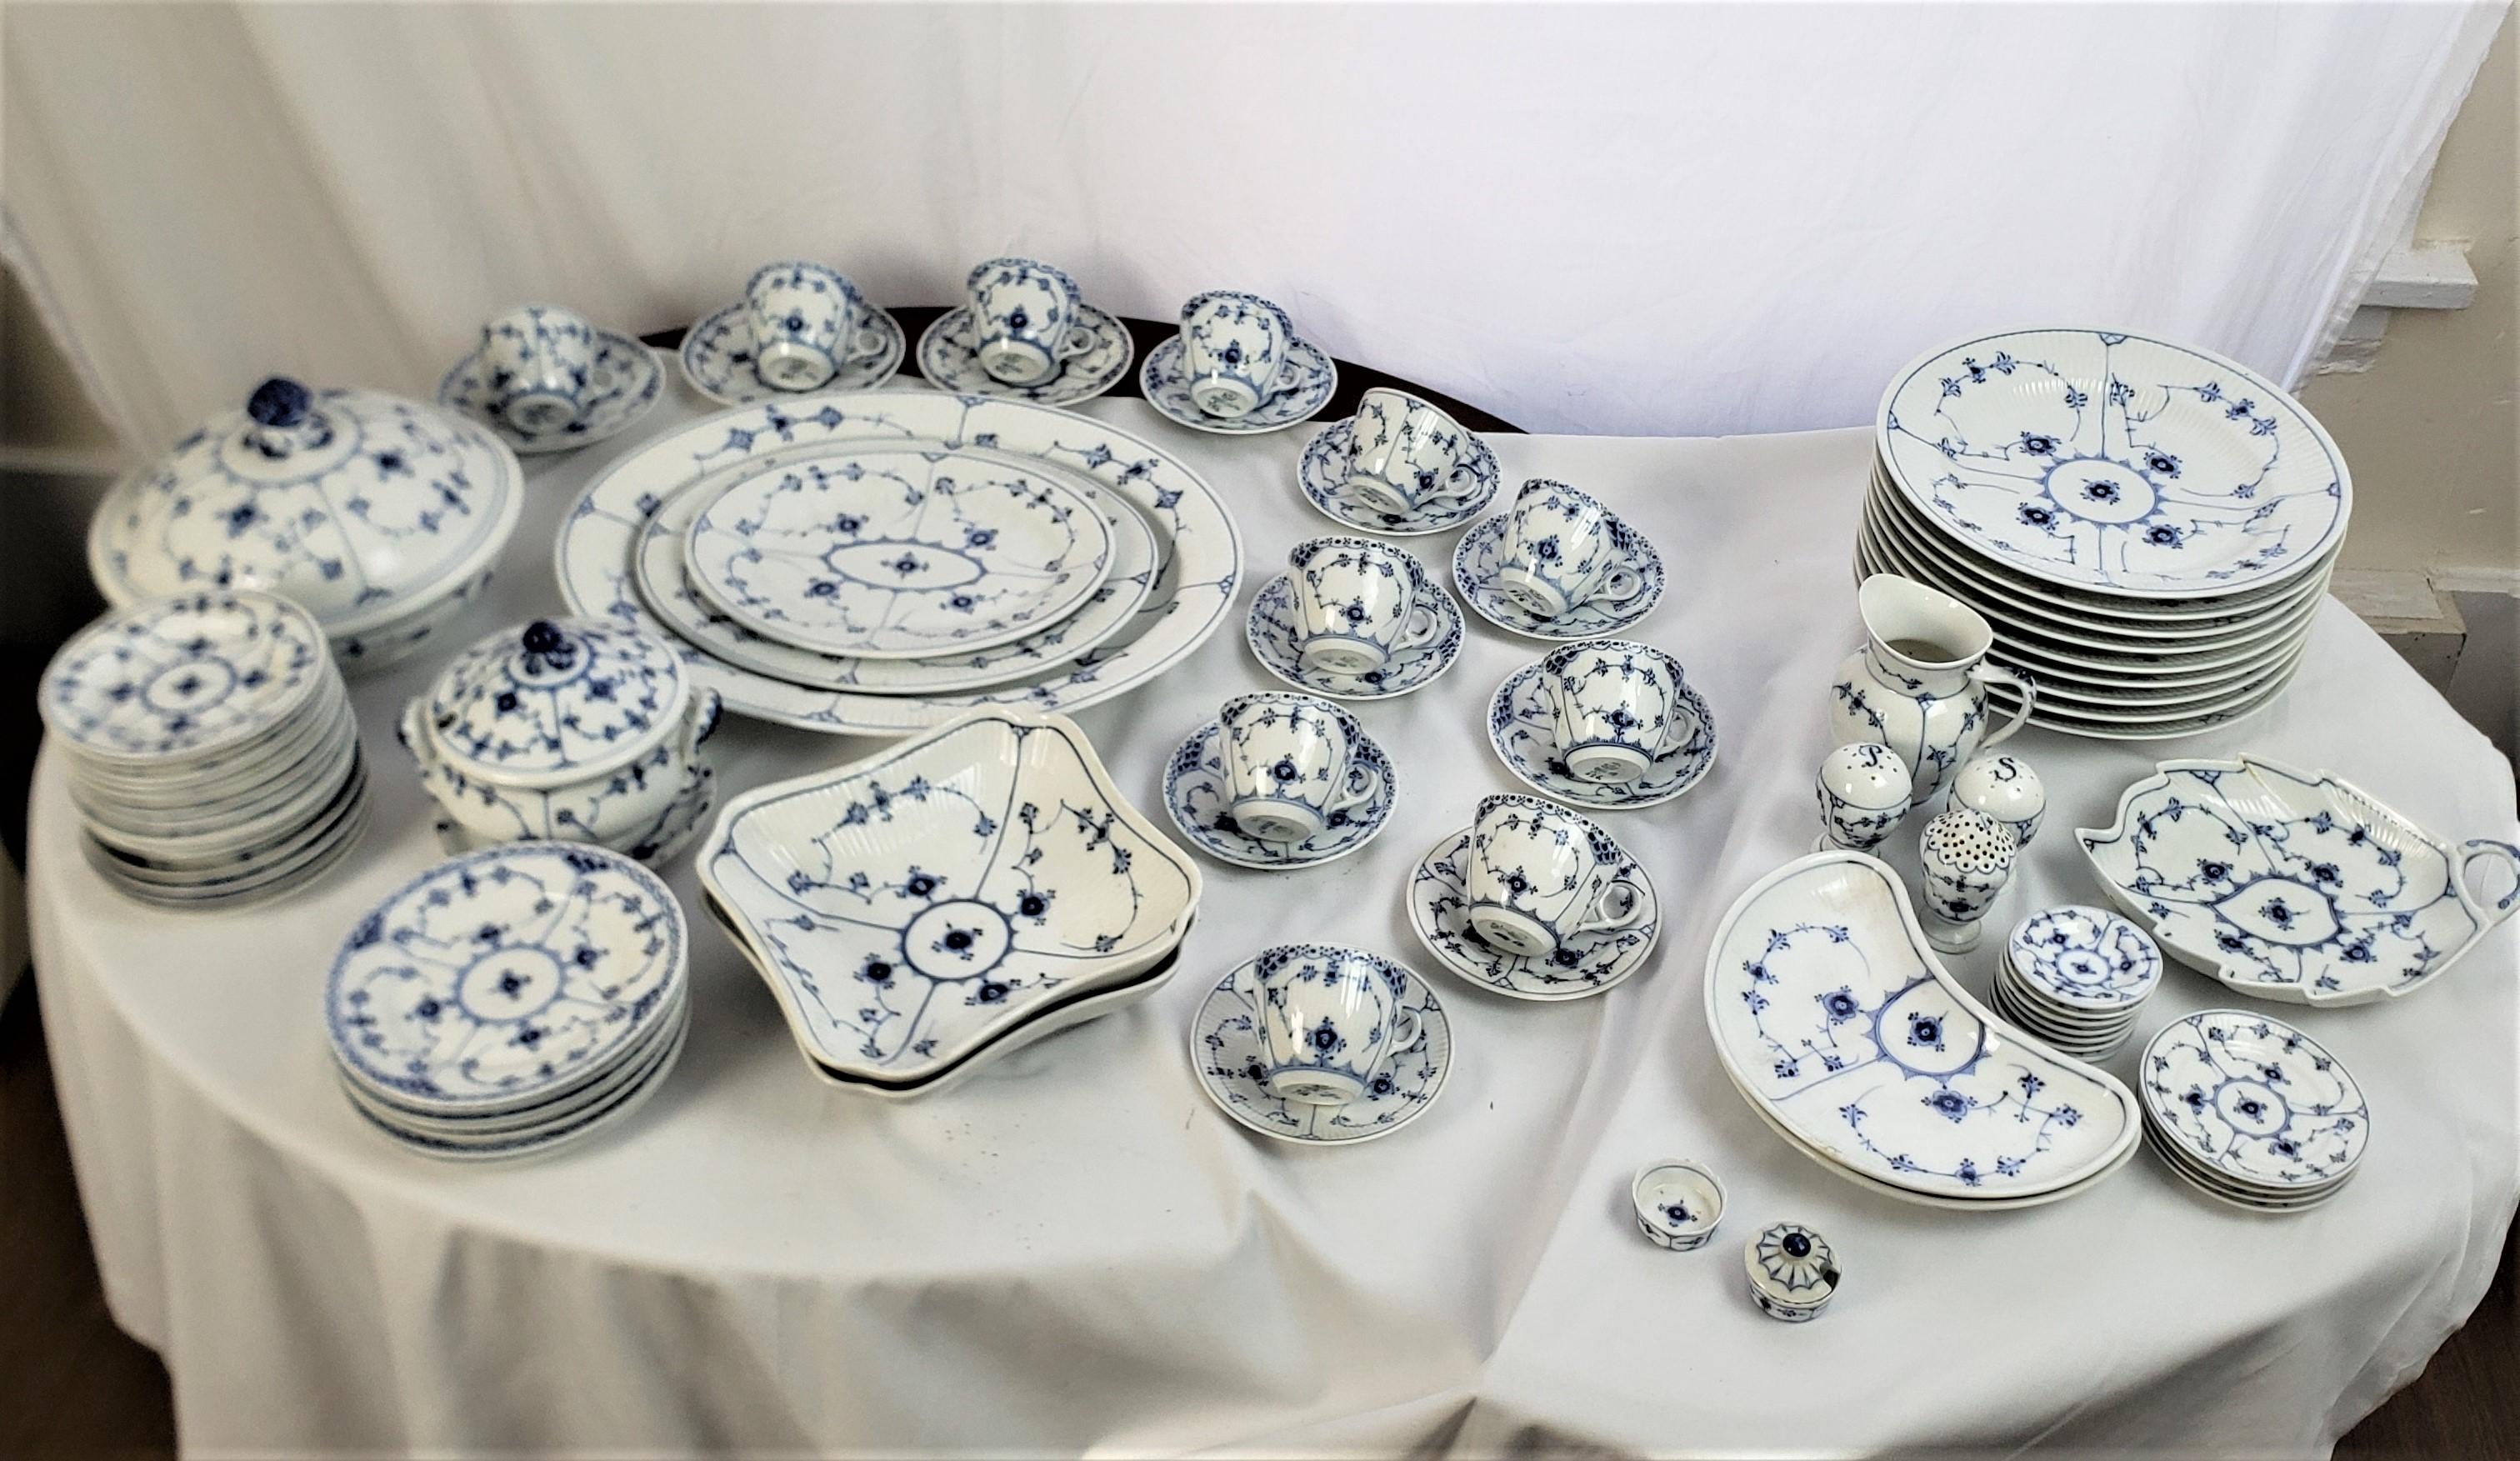 This antique partial mixed dinner service was made by the well known Royal Copenhagen factory of Denmark between 1880 and 1920, in their signature style. The set is composed of porcelain and is done in their classic blue fluted half lace pattern.